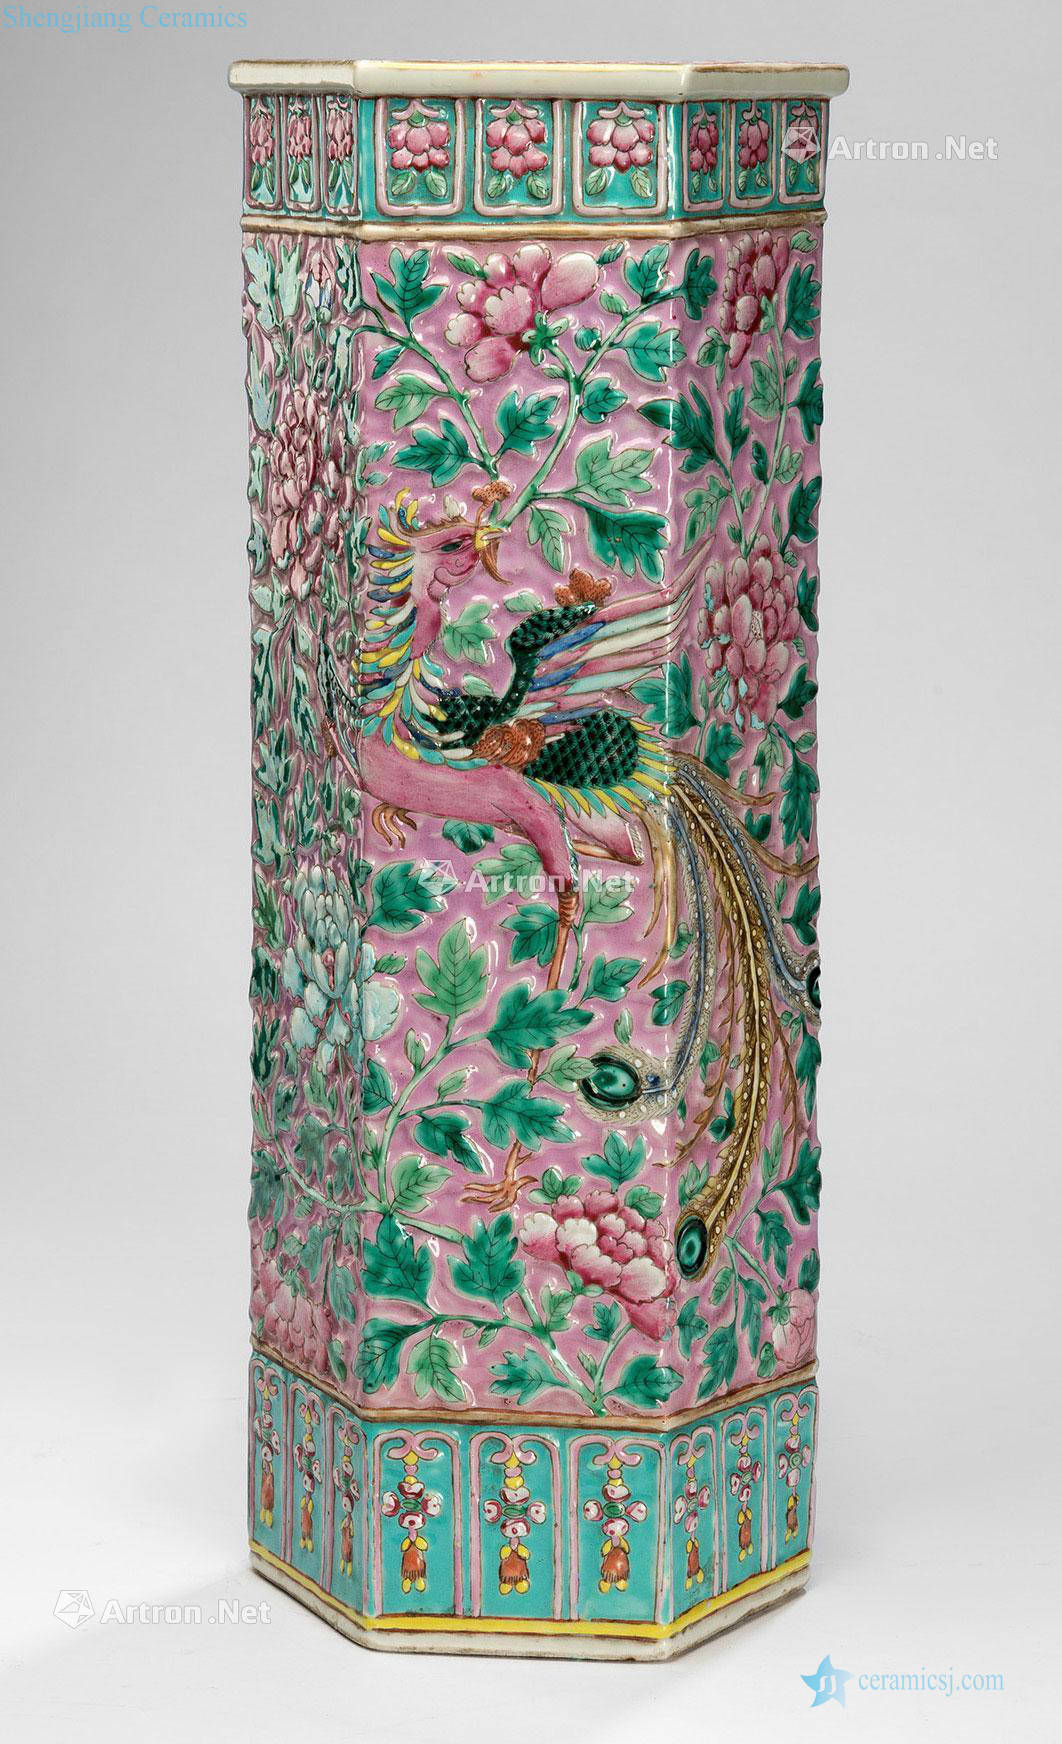 Pastel reign of qing emperor guangxu bottle with six arrises in grain